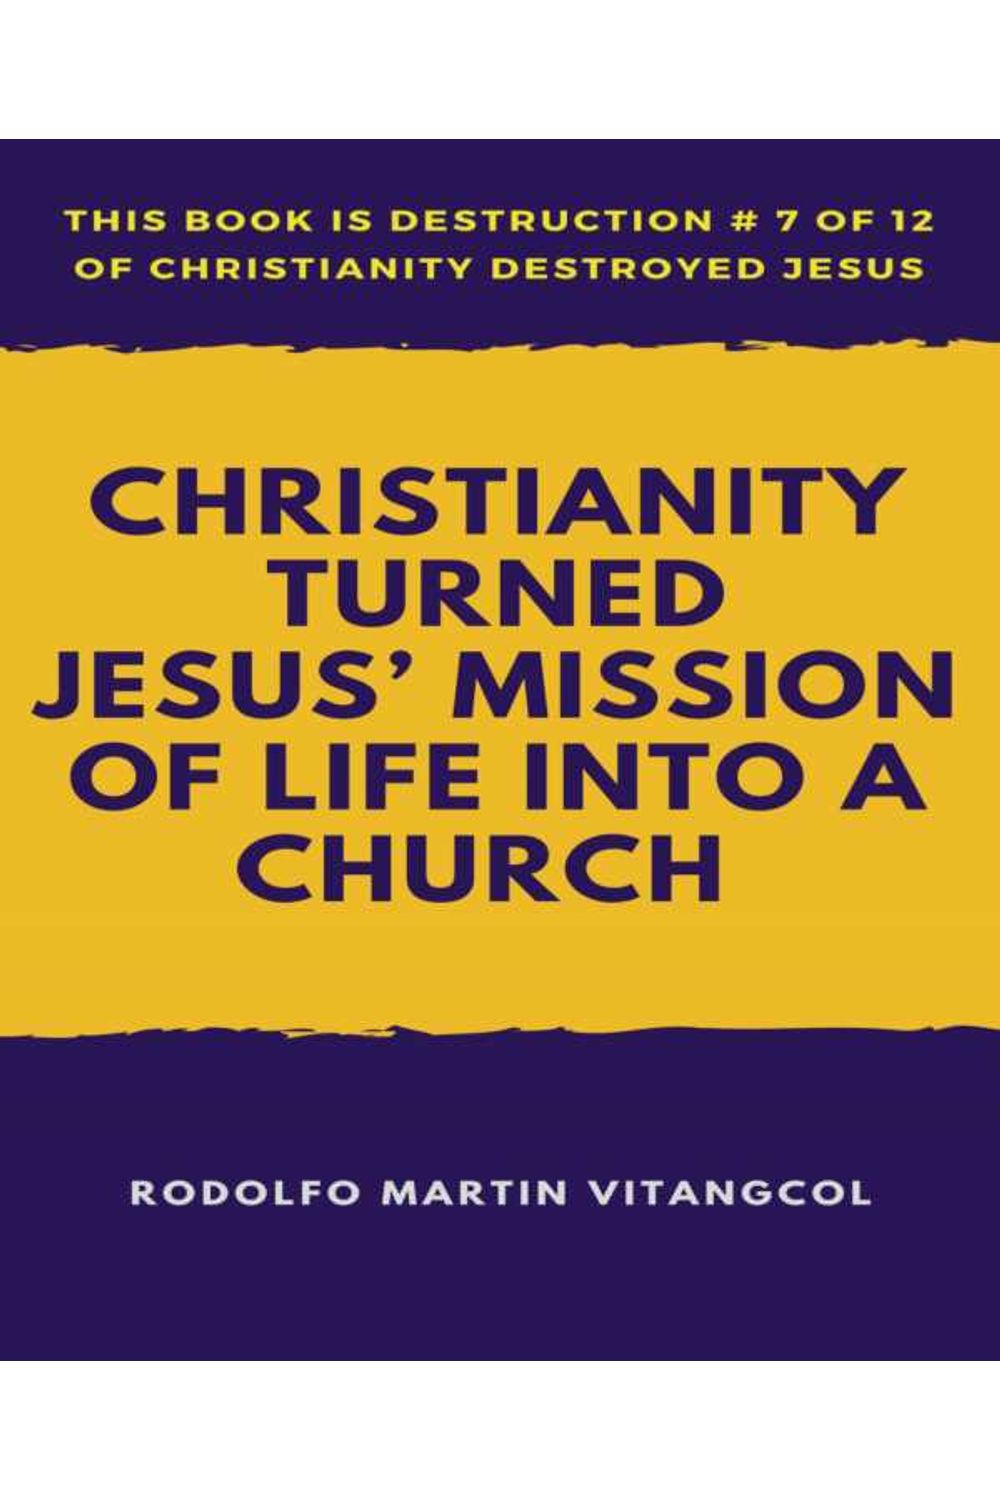 bw-christianity-turned-jesus-mission-of-life-into-a-church-bookrix-9783743894235